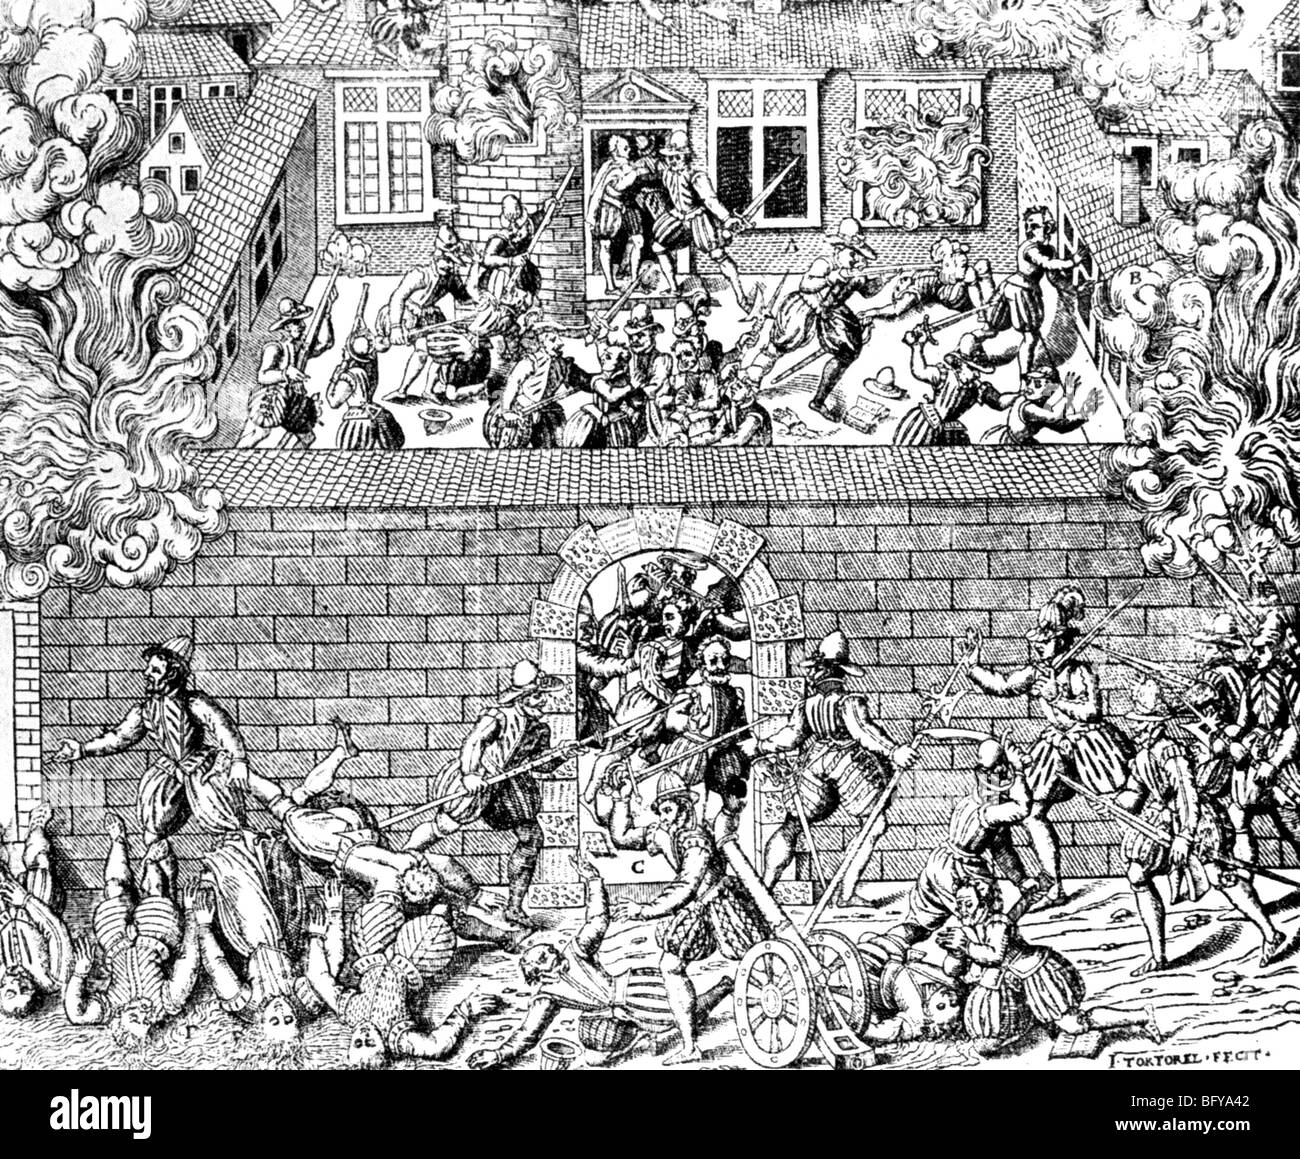 MASSACRE OF THE HUGUENOTS in Cahors, France, in 1561 Stock Photo